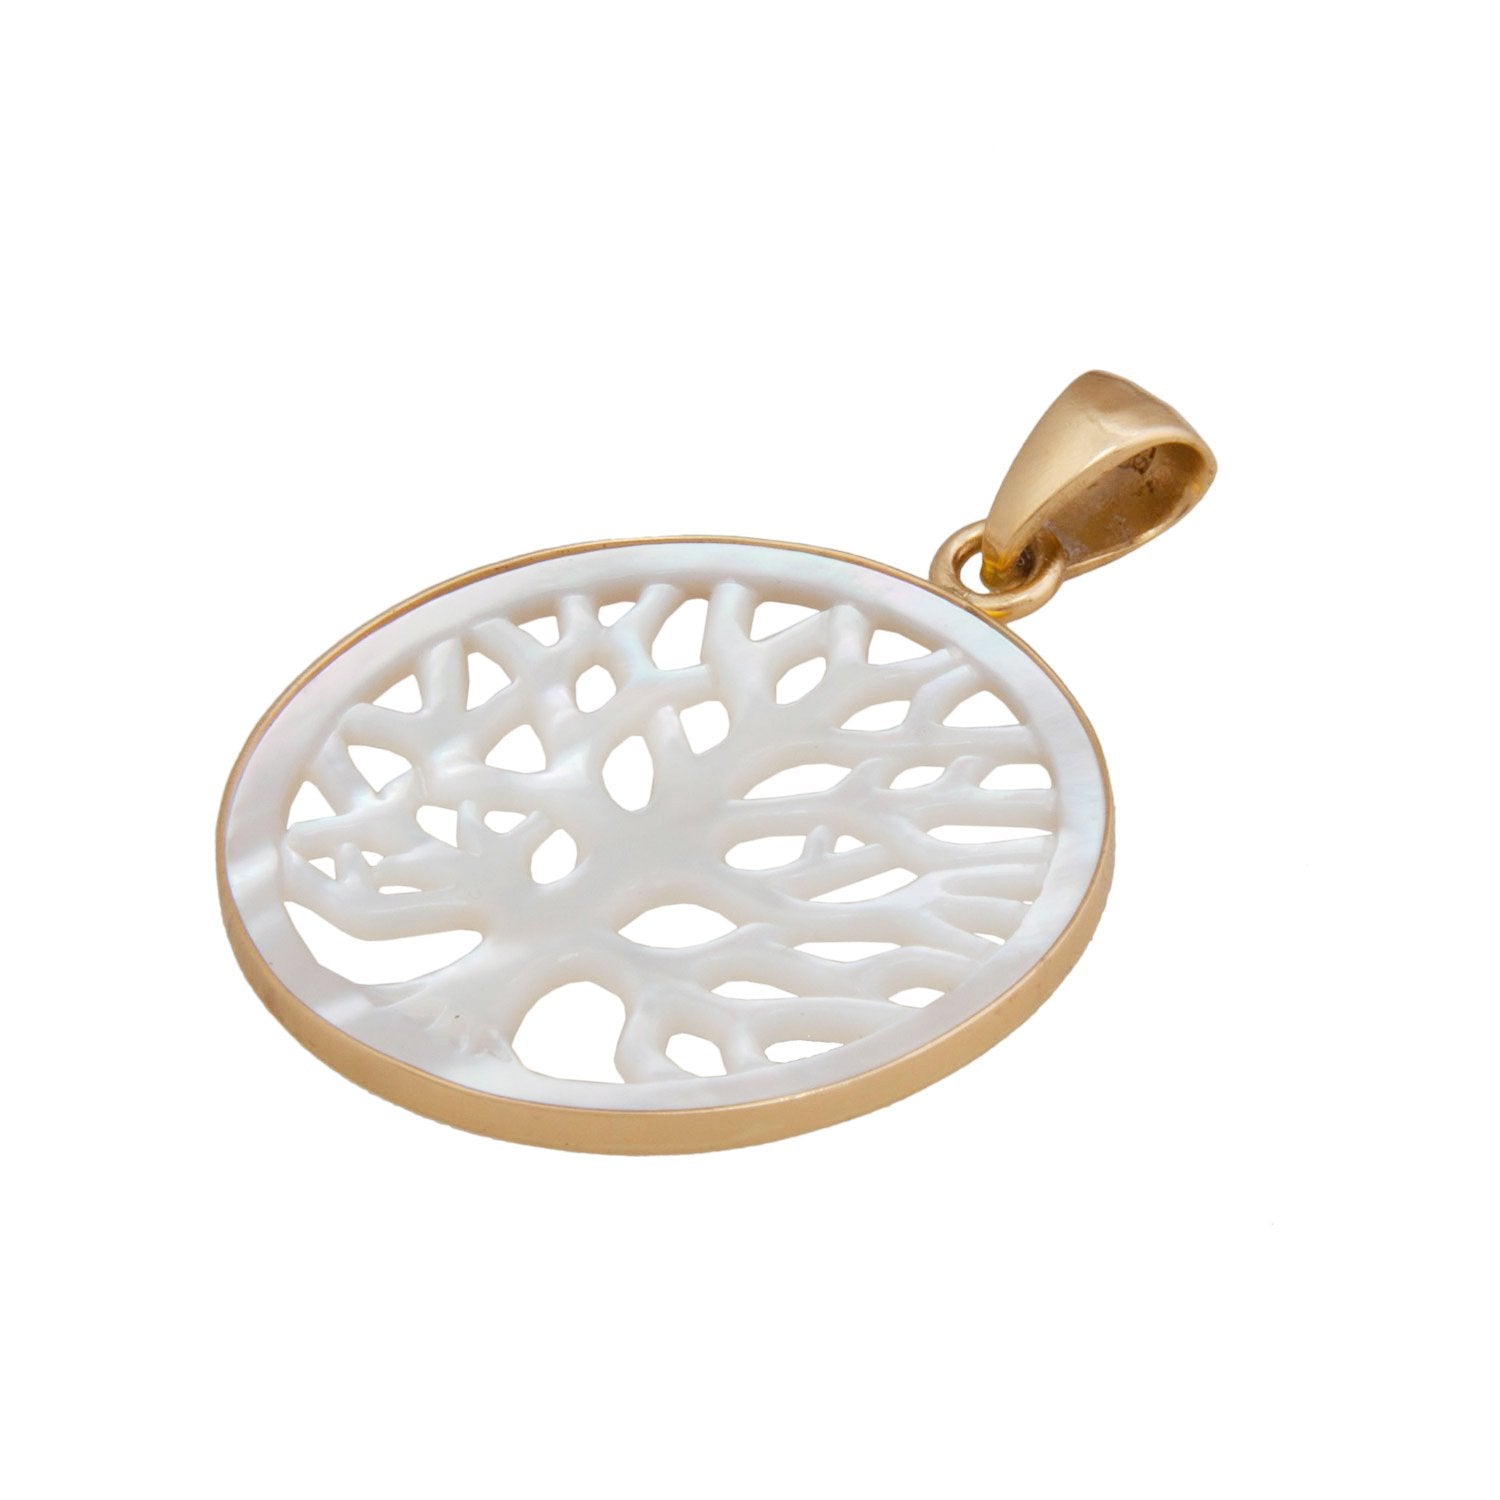 Charles Albert Jewelry - Alchemia 25mm Mother of Pearl Tree of Life Pendant - Side View